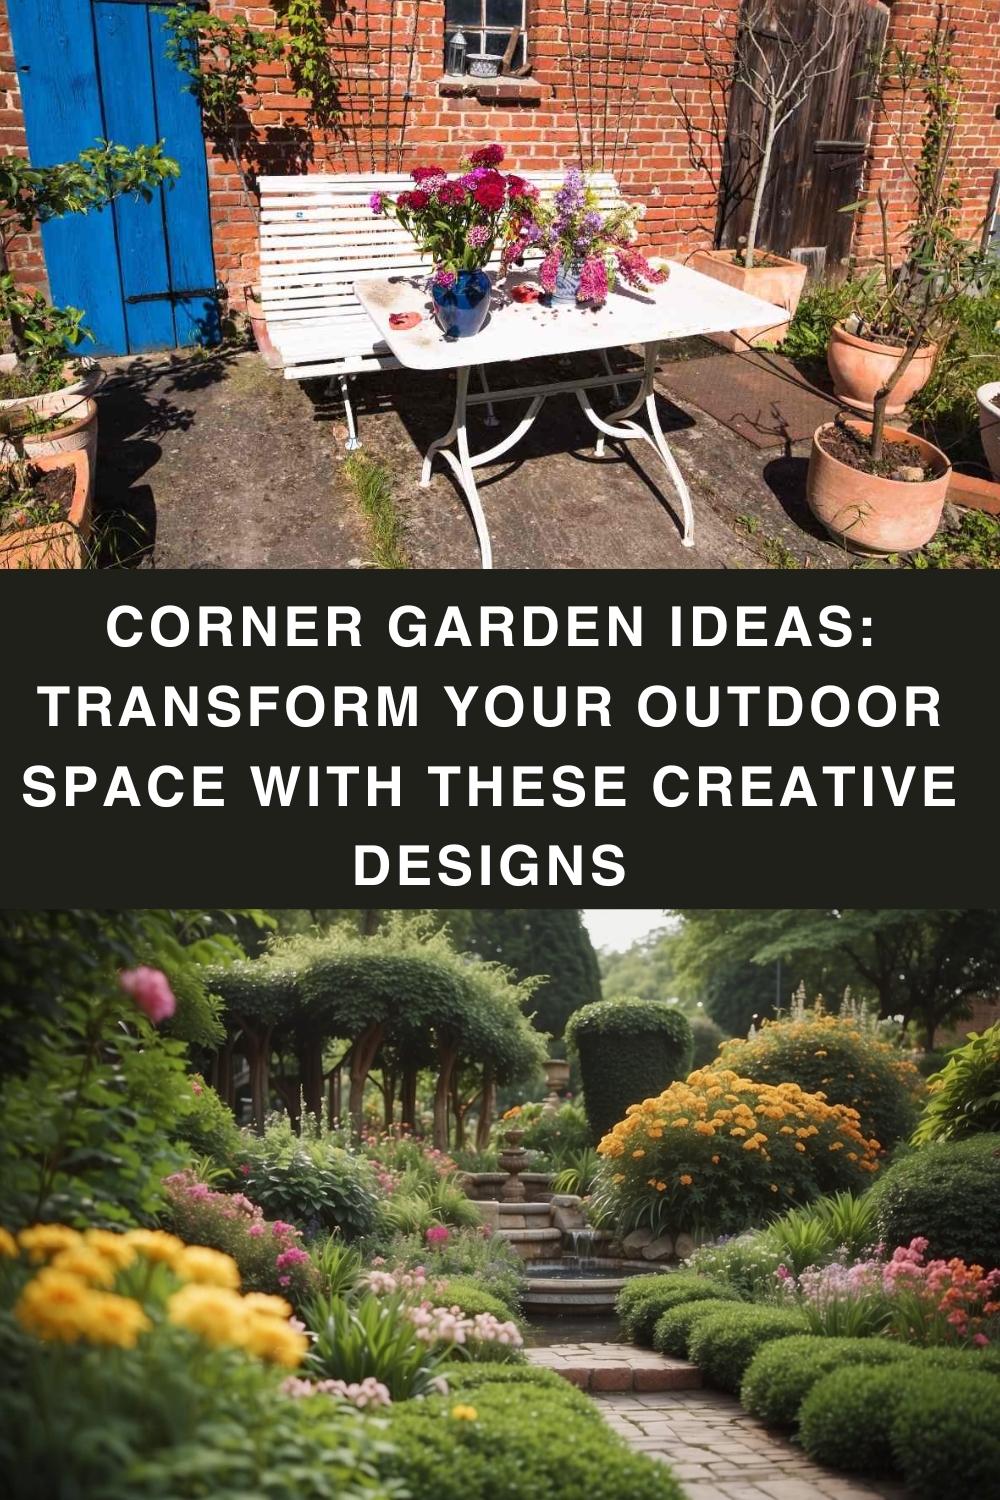 Corner Garden Ideas: Transform Your Outdoor Space with These Creative Designs pin